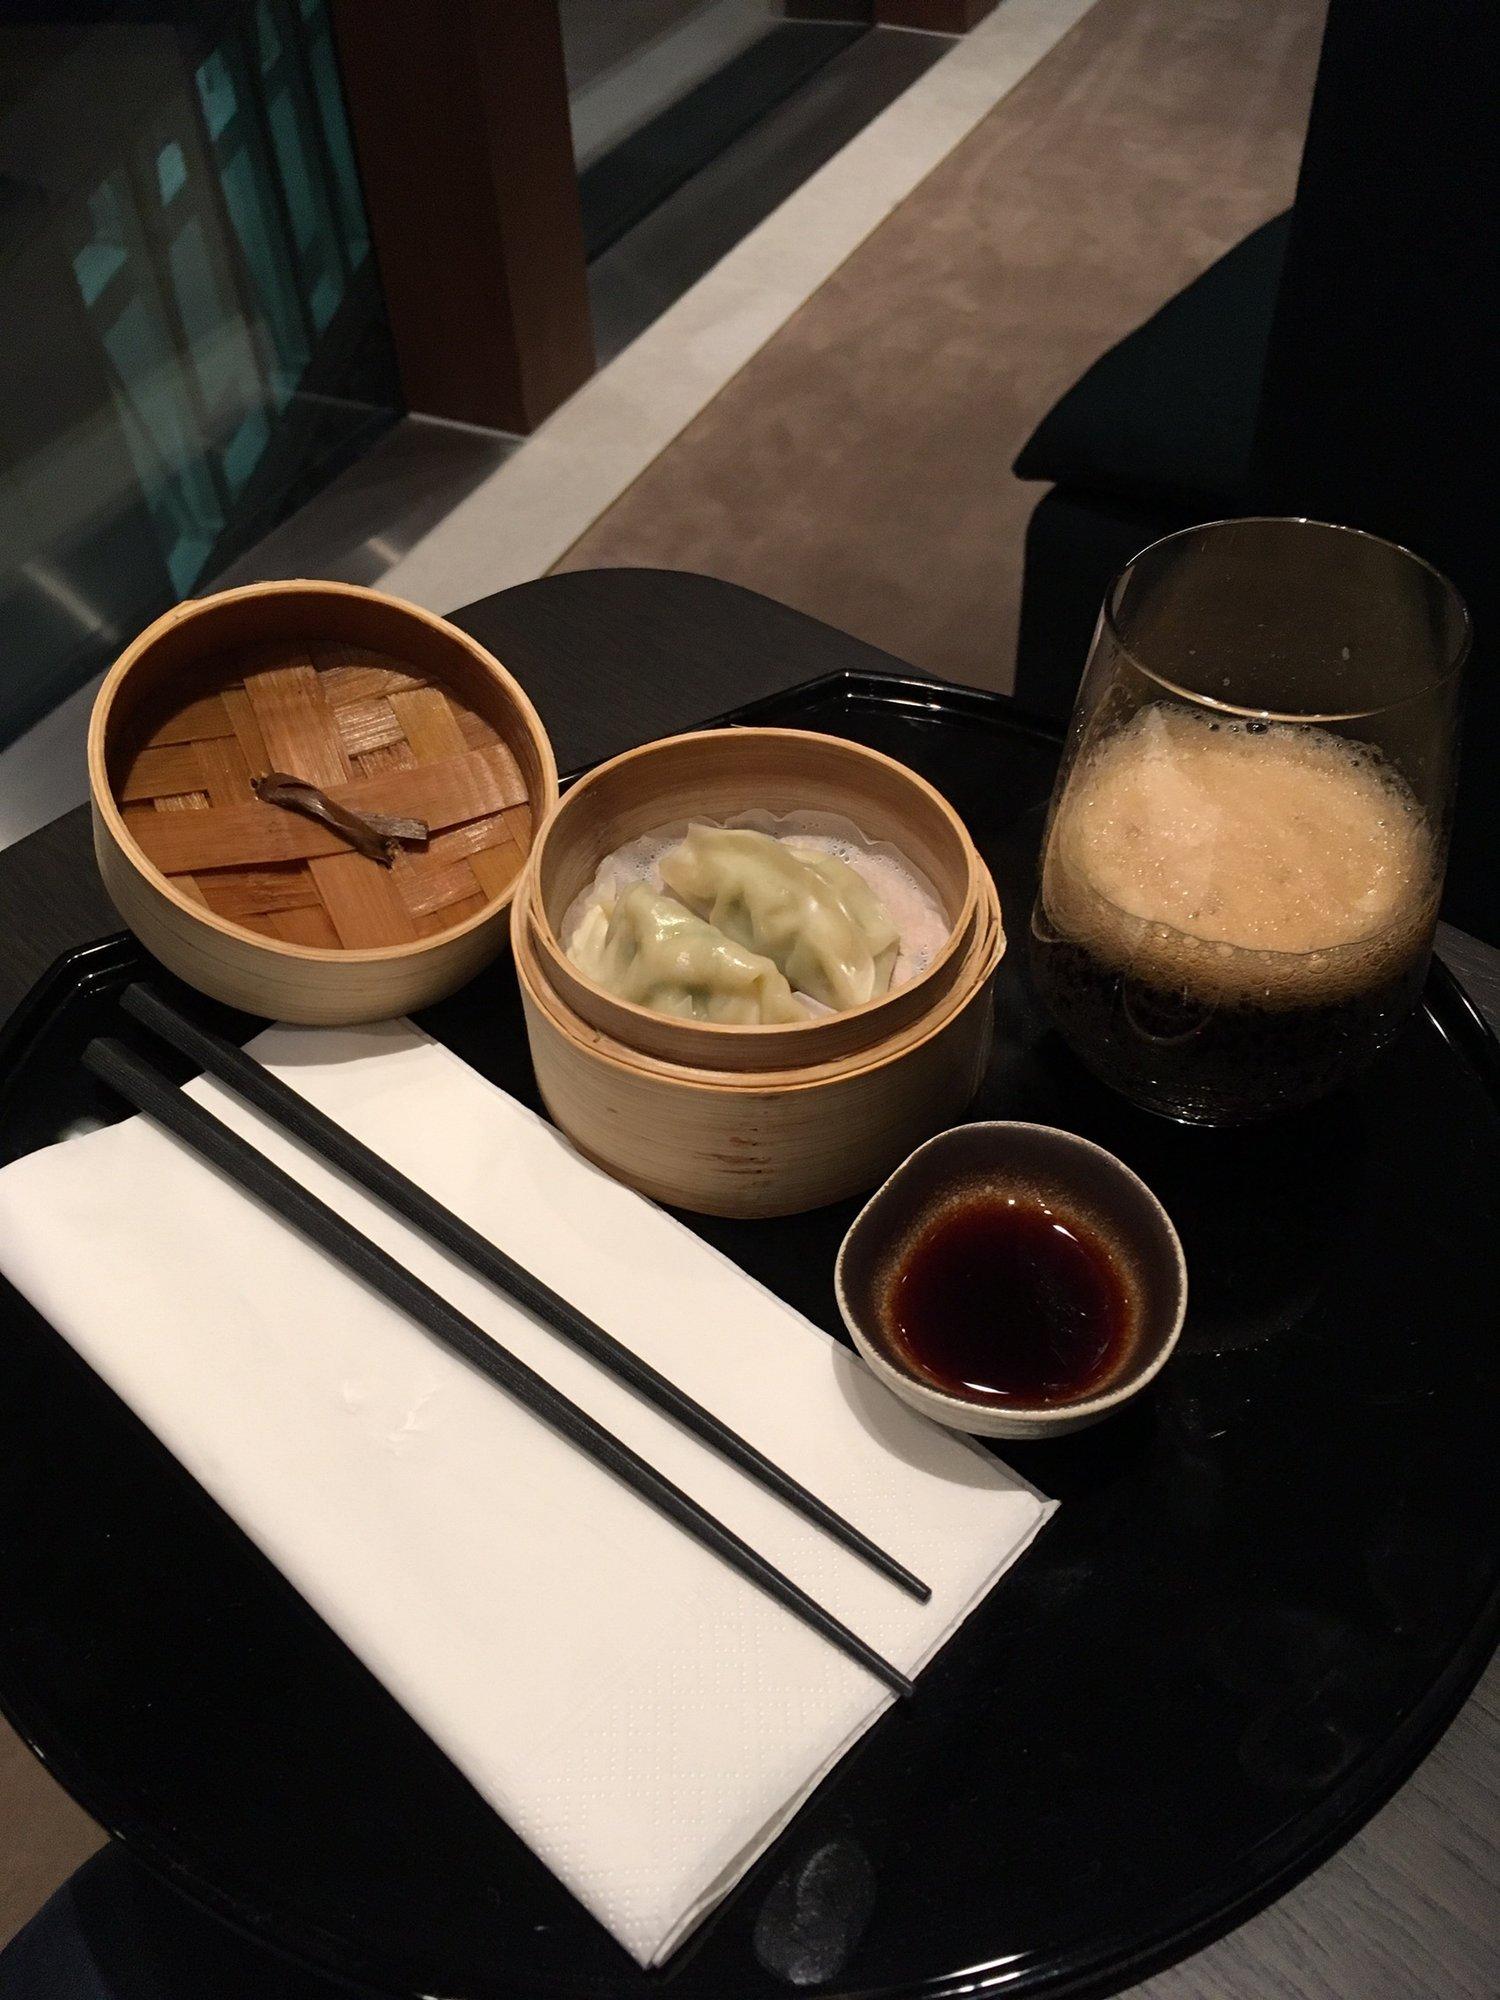 Cathay Pacific Business Class Lounge image 33 of 48